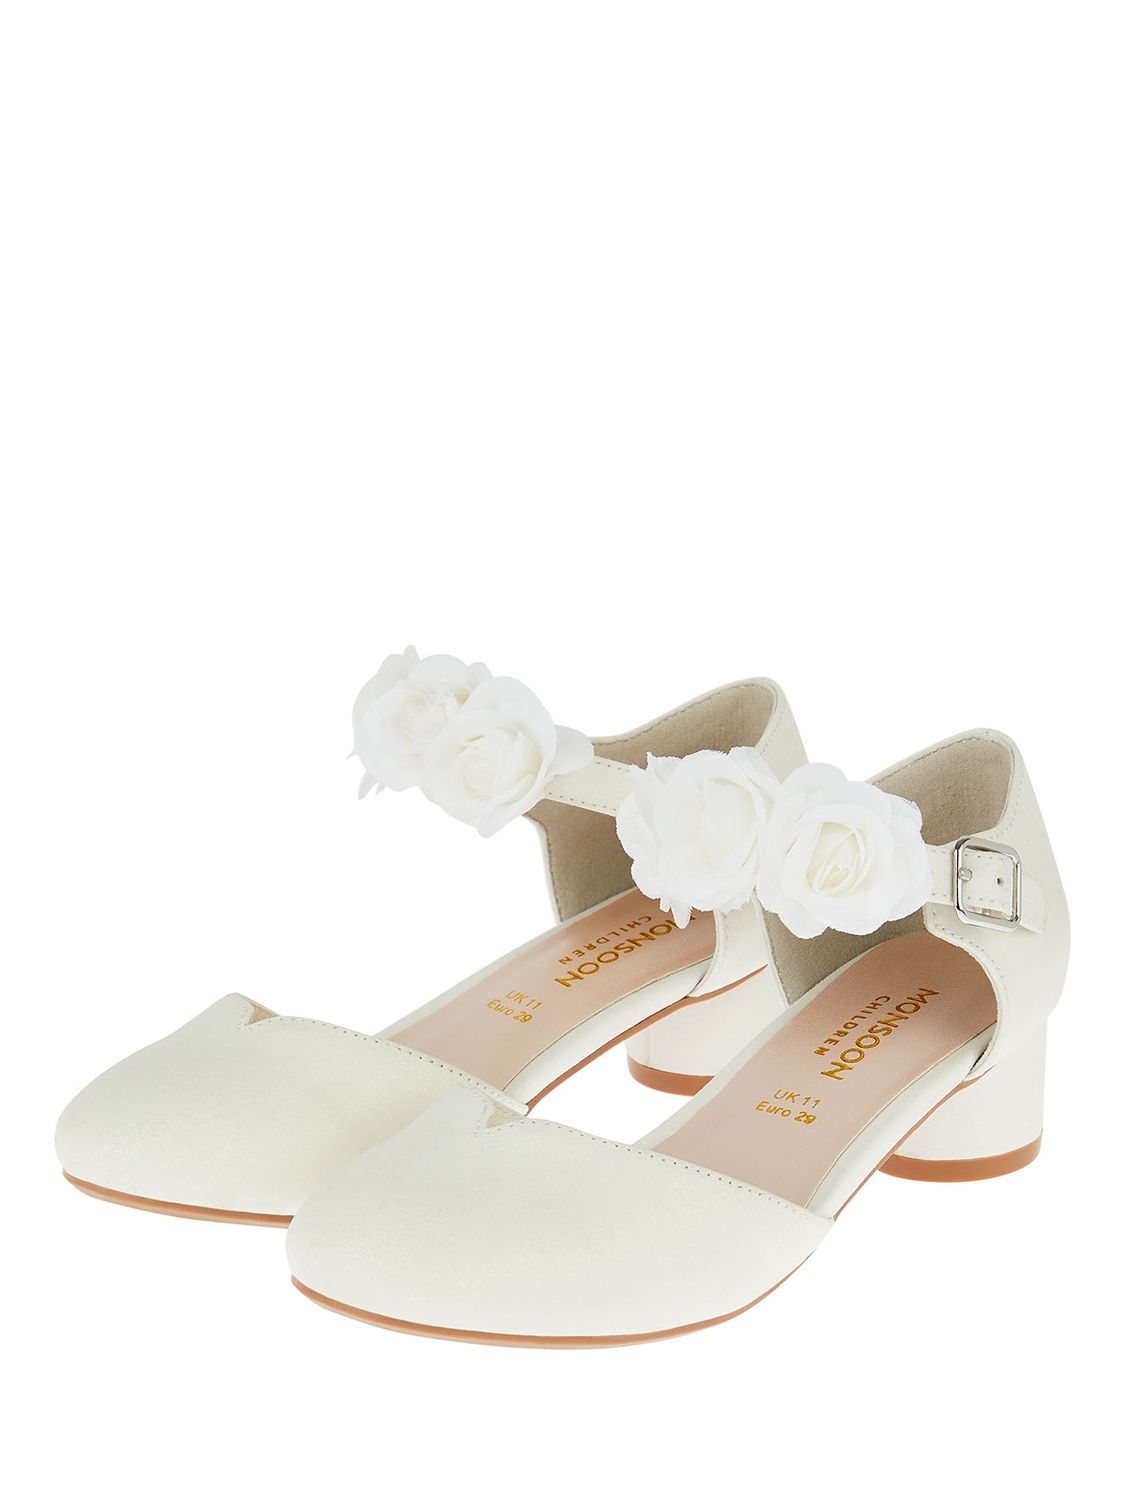 Monsoon Kids' Corsage Two Part Heels, Ivory, A4